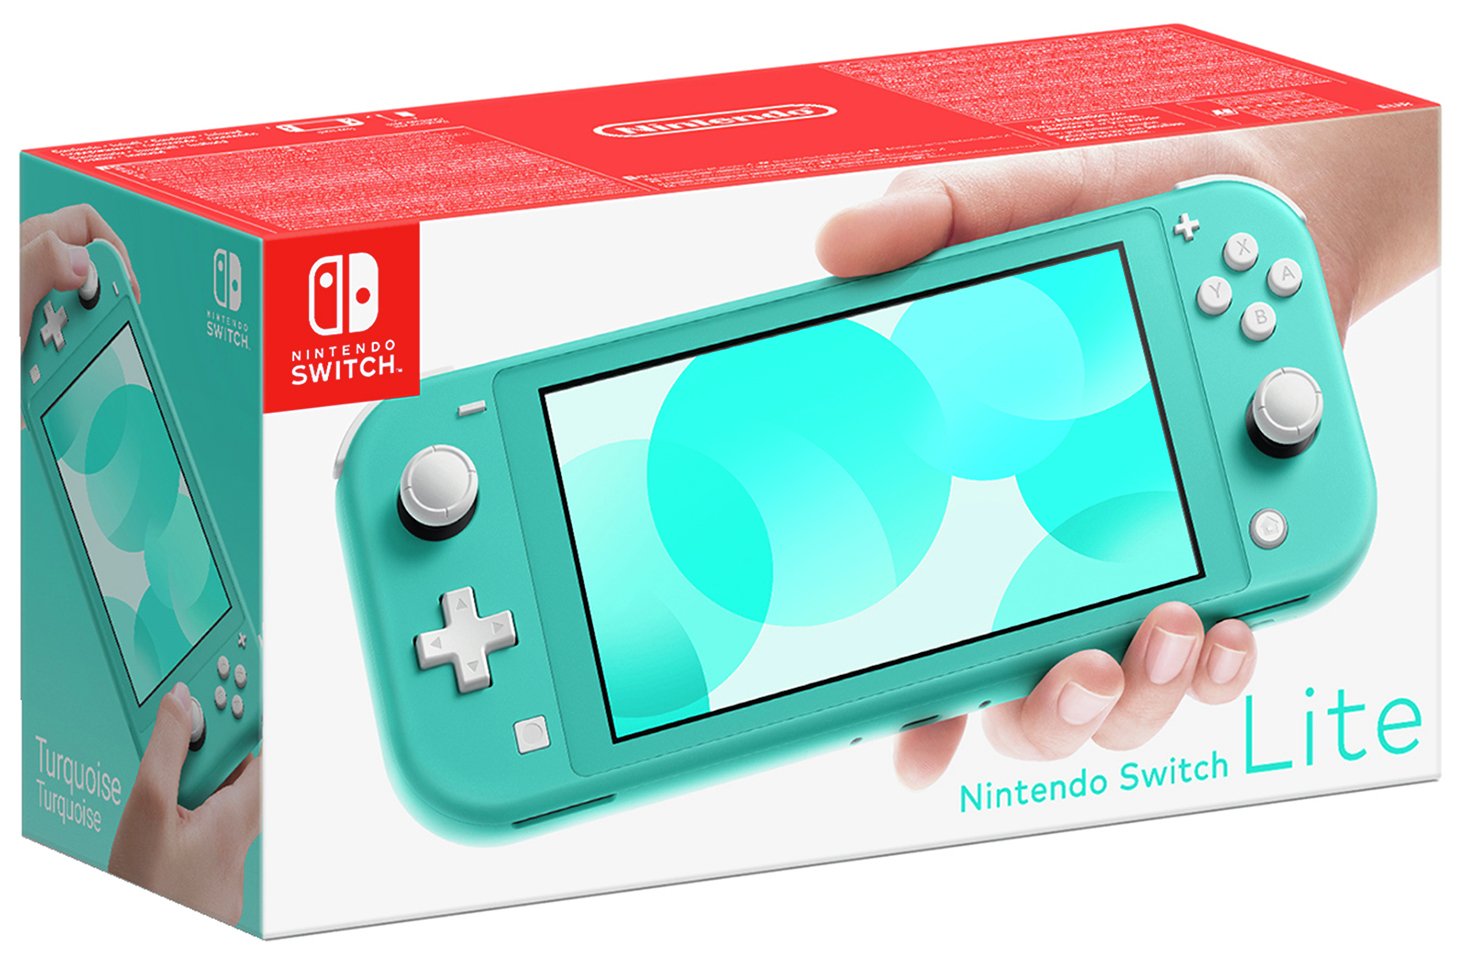 how much is a nintendo switch from argos